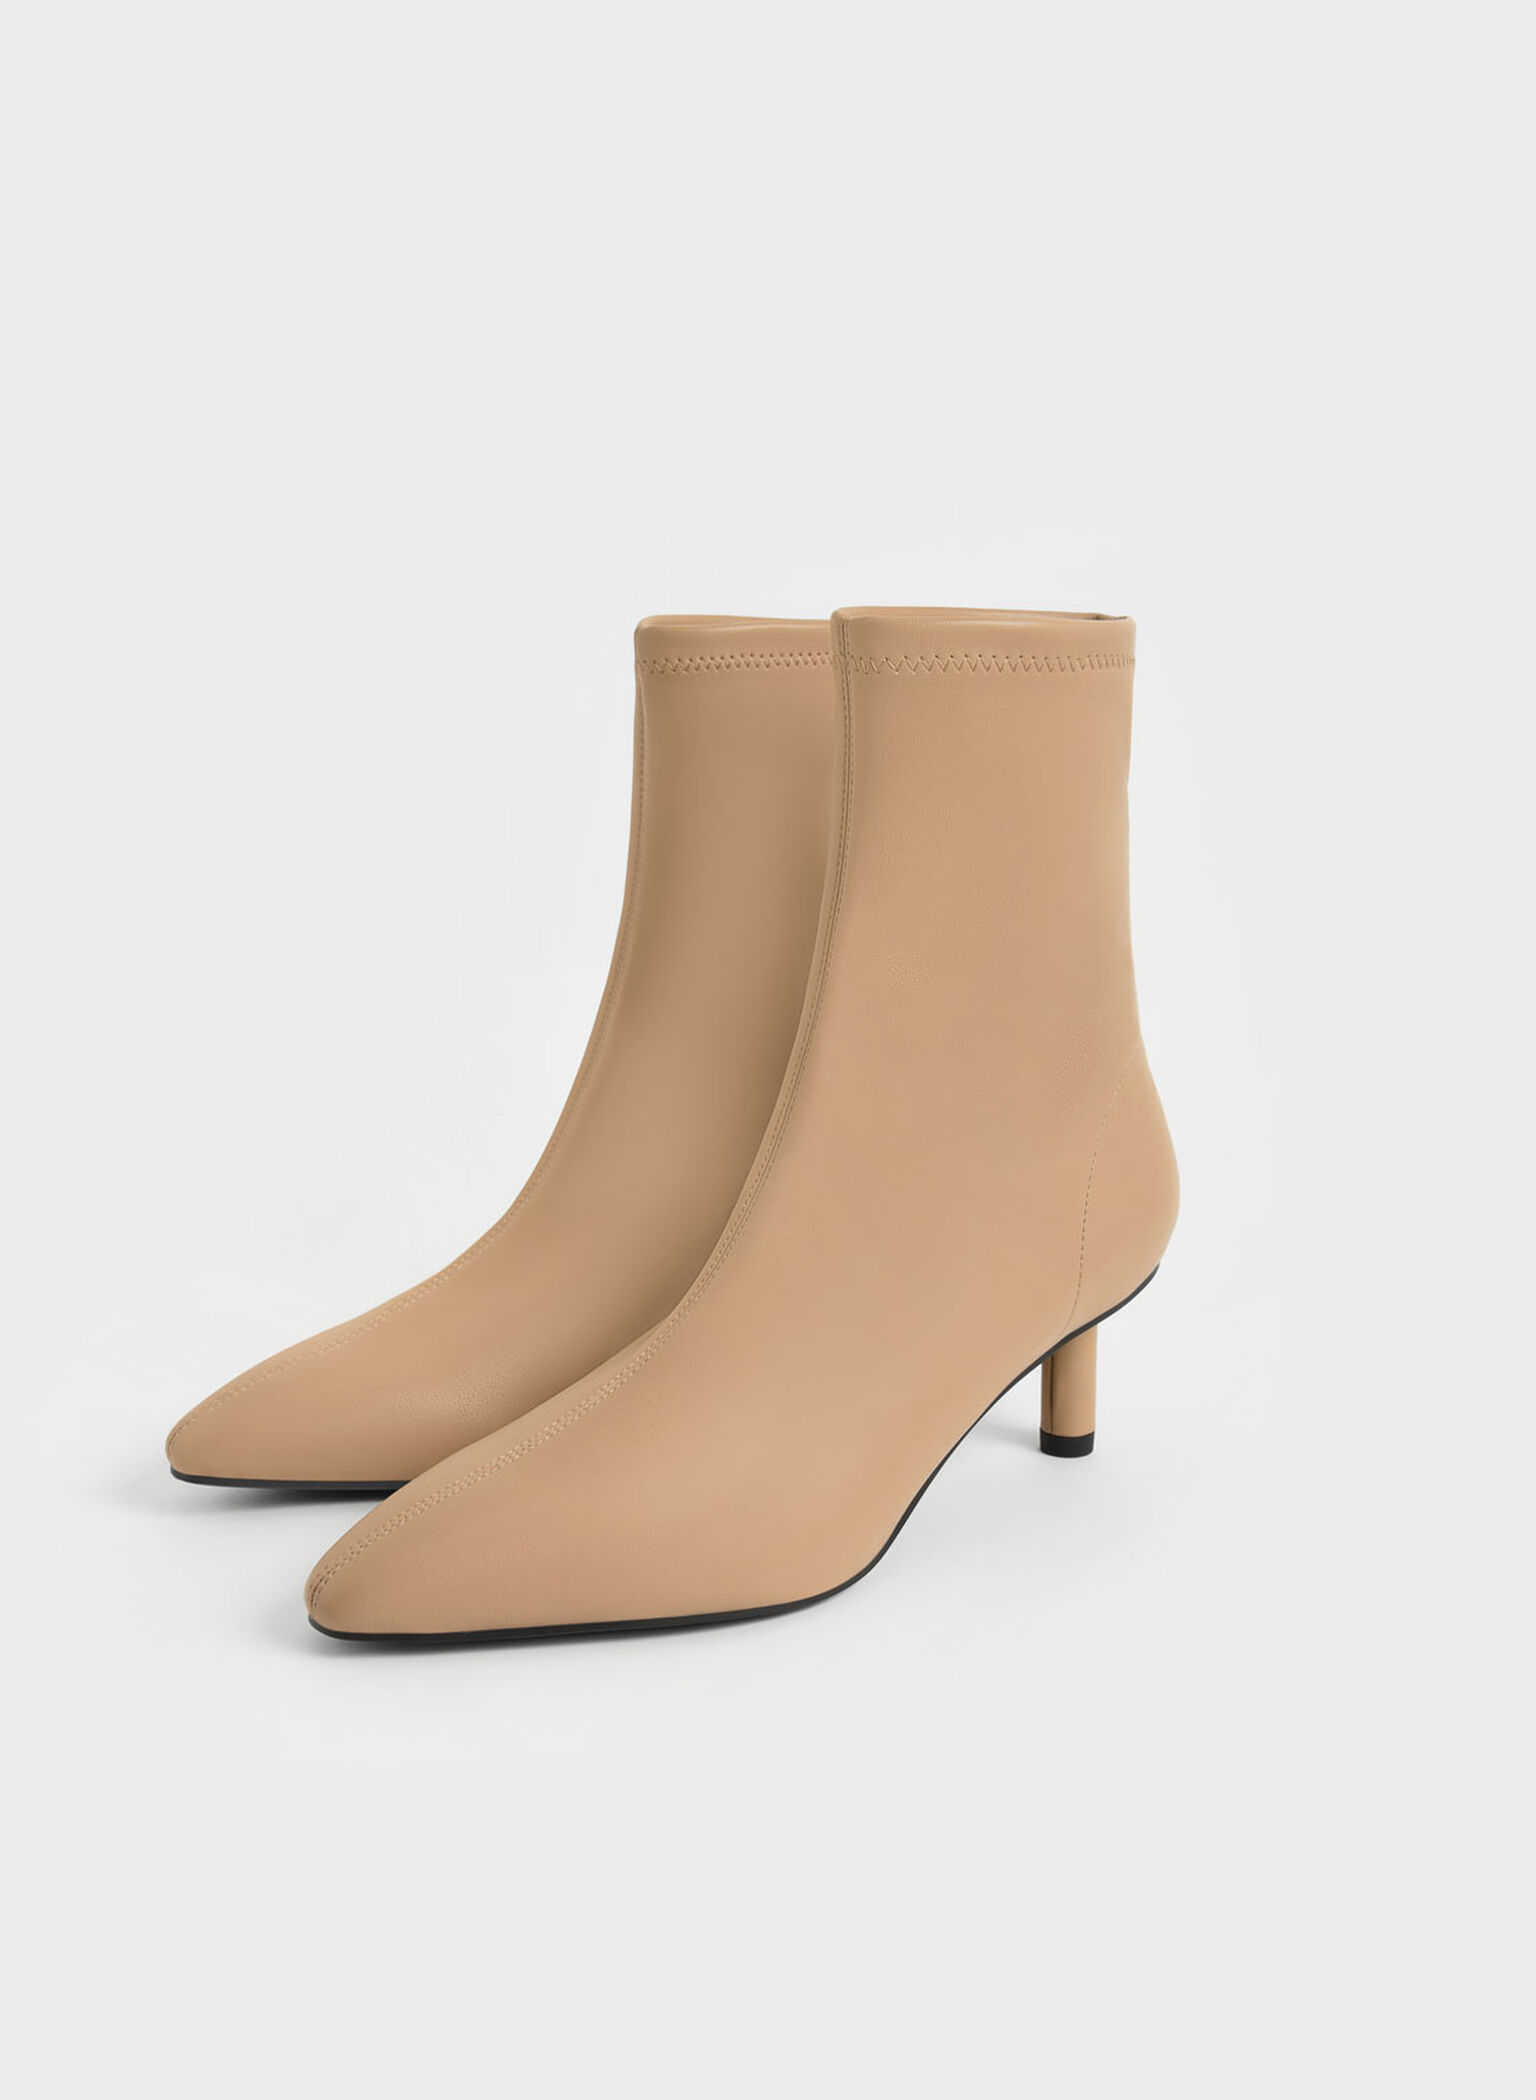 Cylindrical Heel Ankle Boots, Sand, hi-res